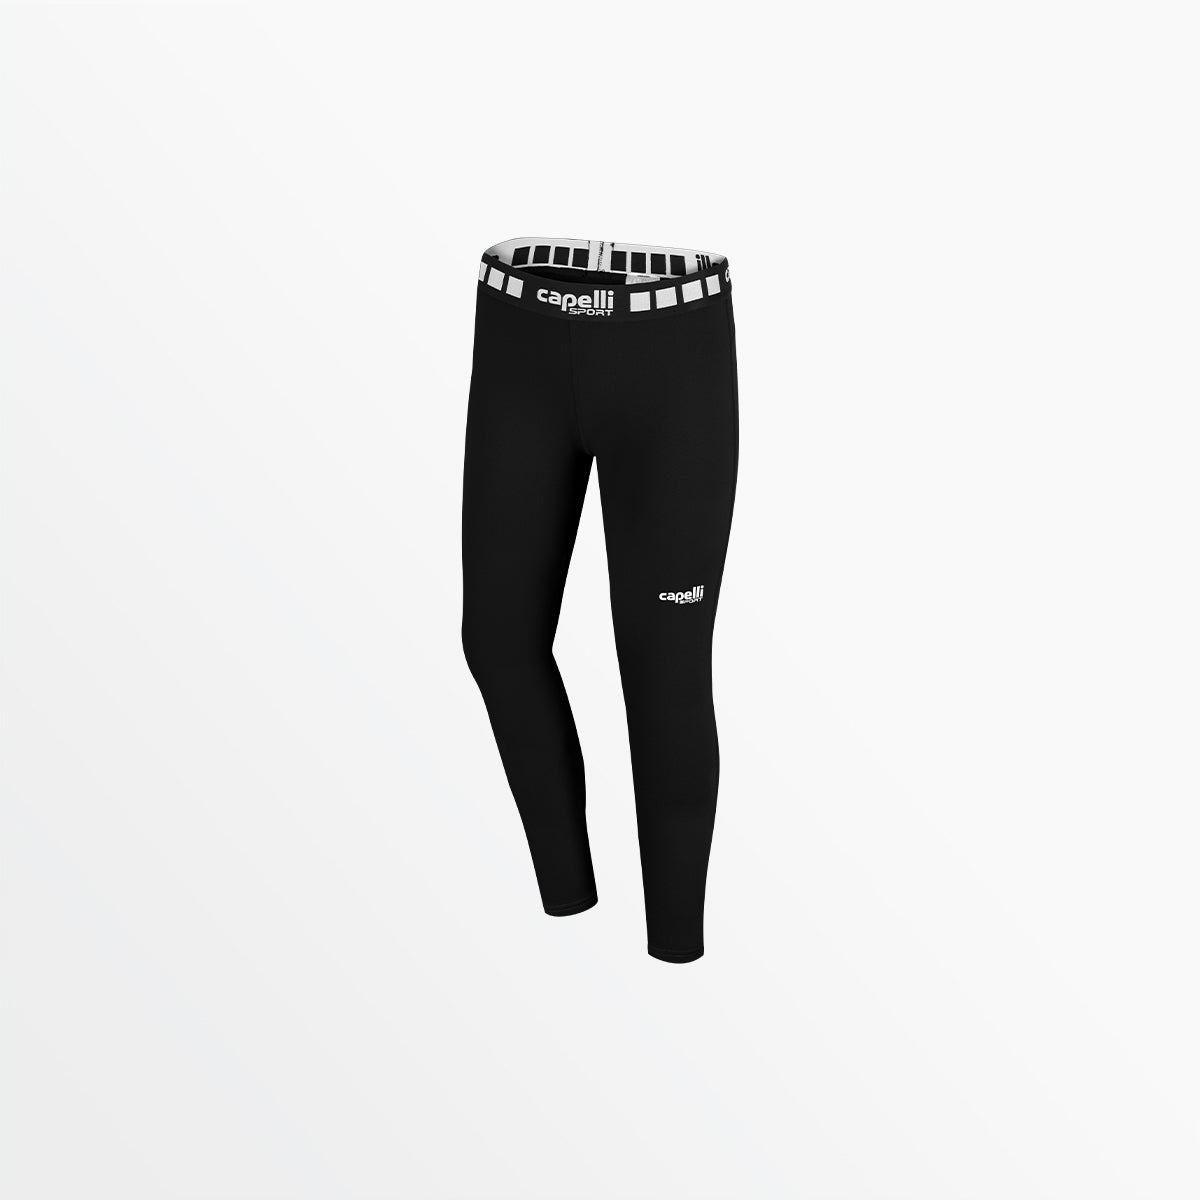 GIRL'S PERFORMANCE TIGHTS